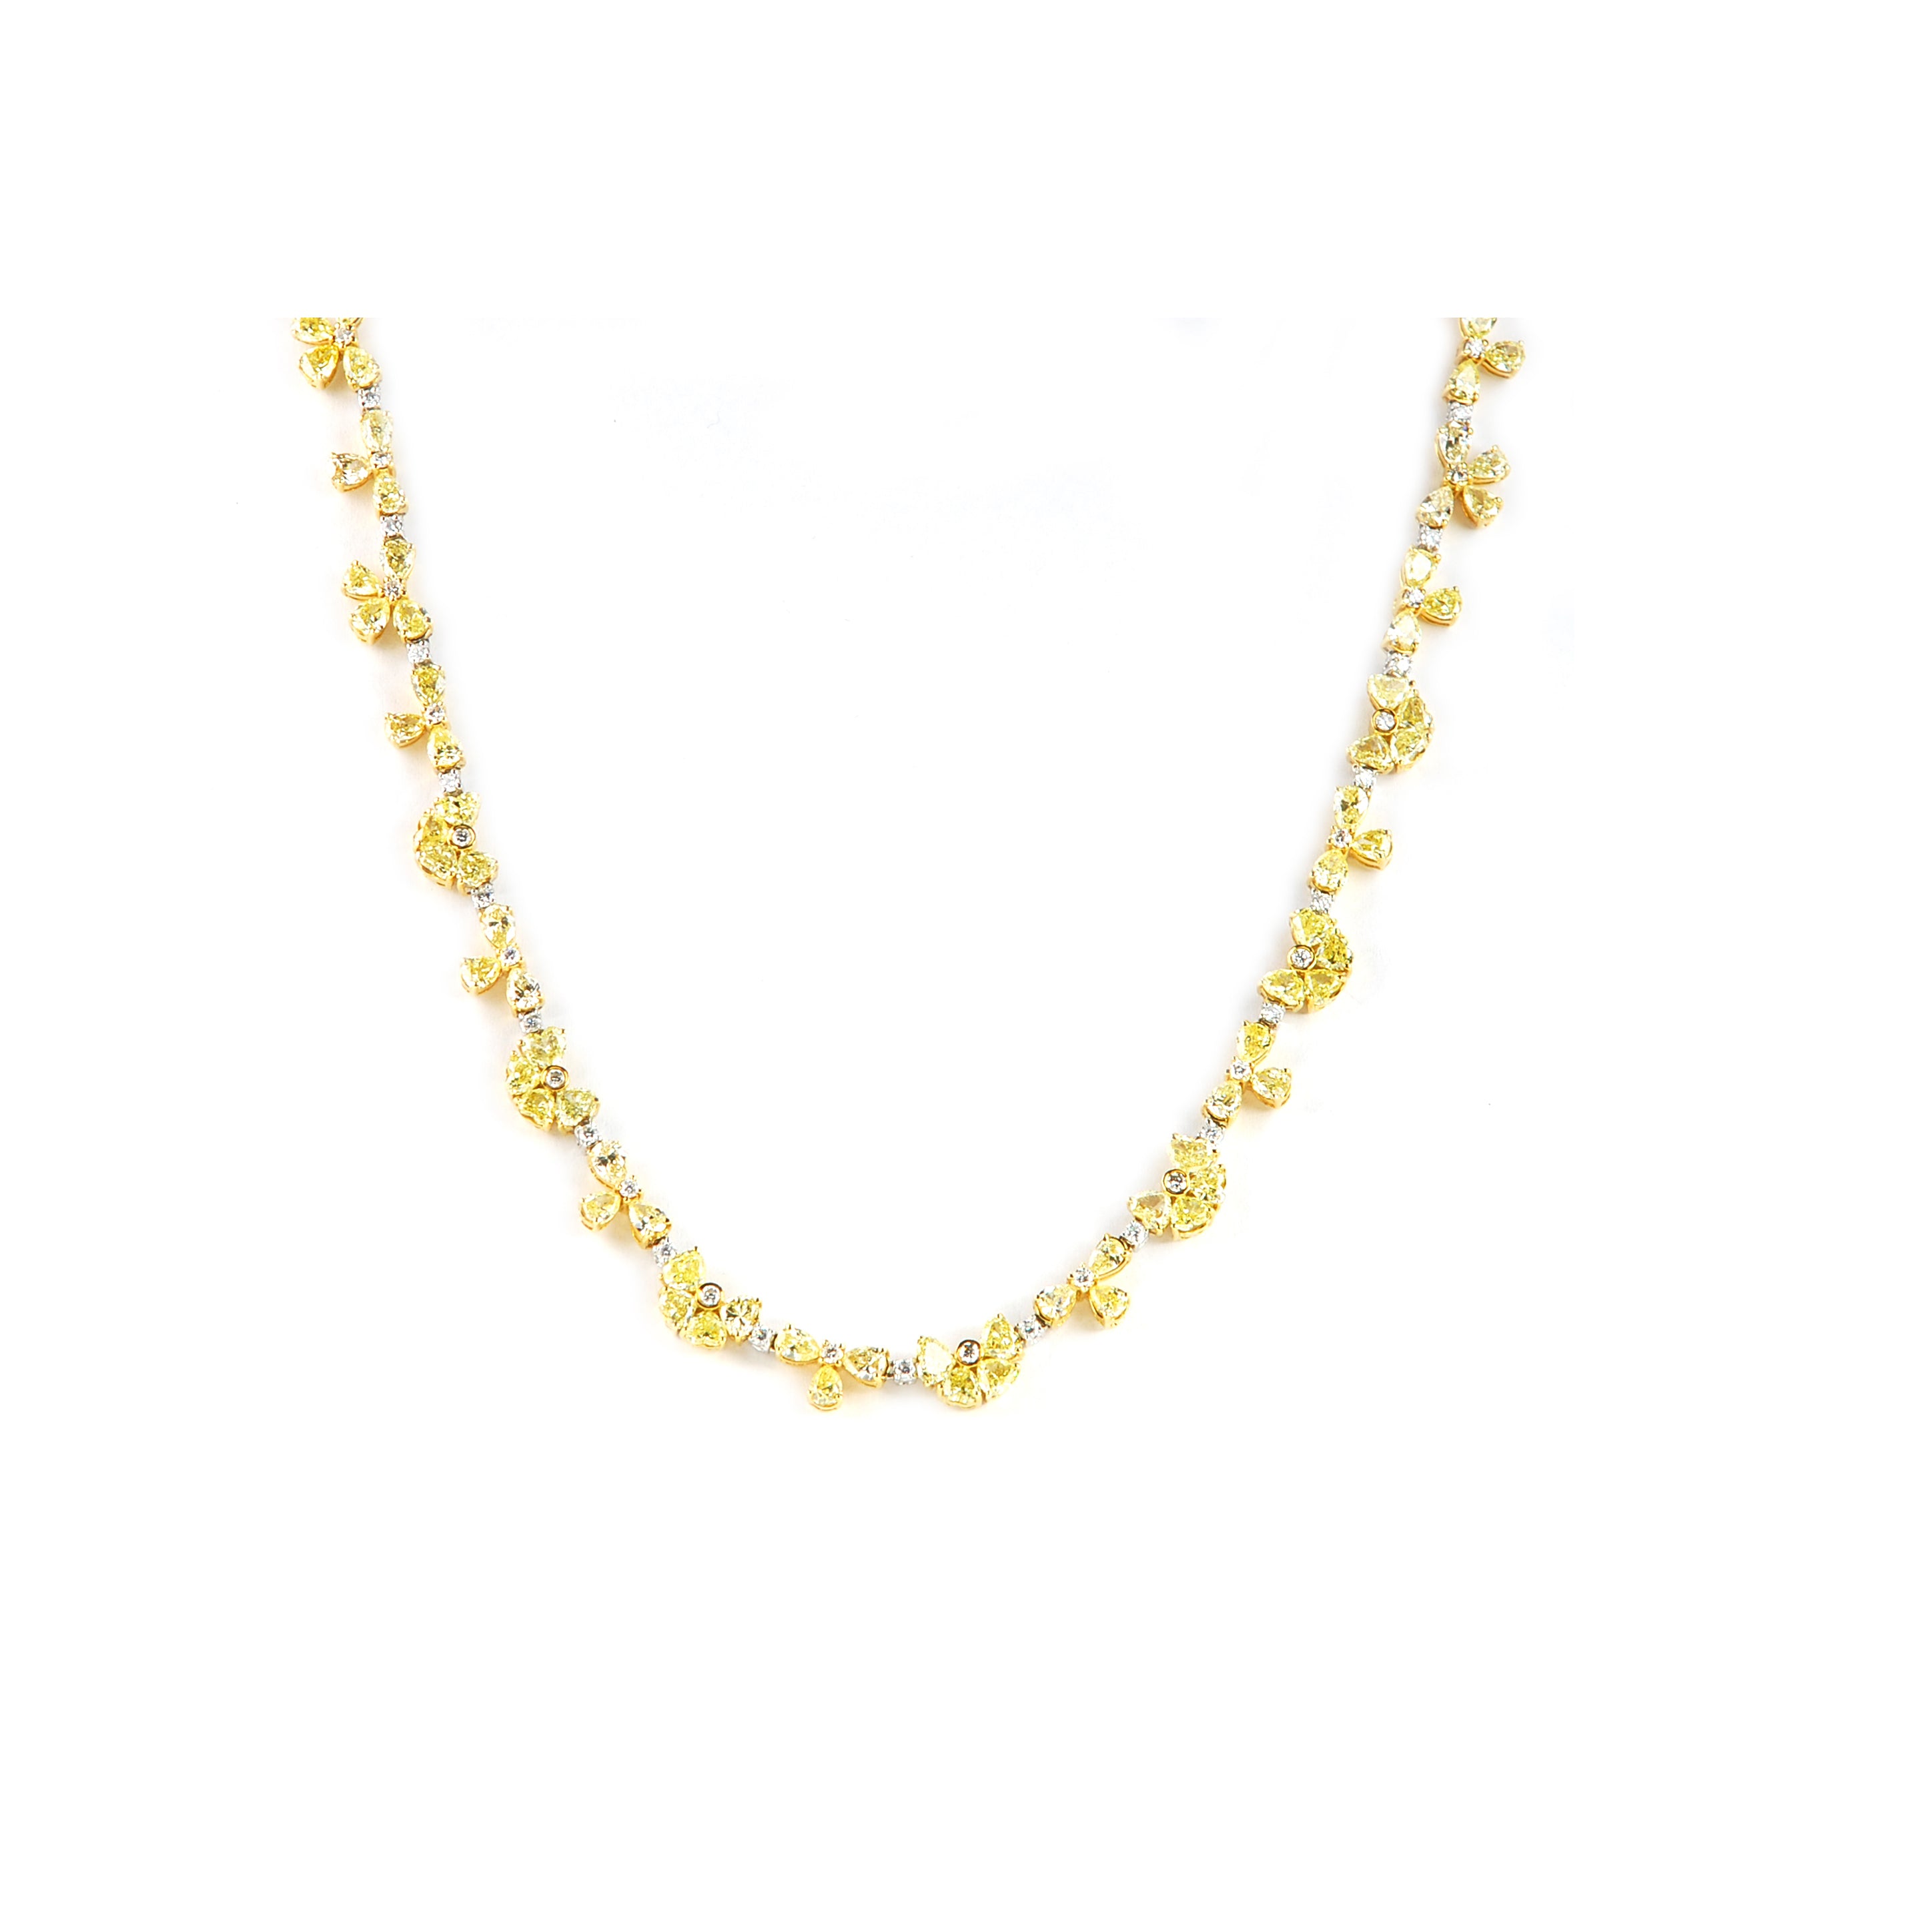 Stunning yellow diamond flower shape necklace.  Set in 18k yellow & white gold.  112 pear shape fancy yellow diamonds 23.26 cts  64 round white diamonds 2.10 cts   Secure clasp with figure 8 for safety  17" long